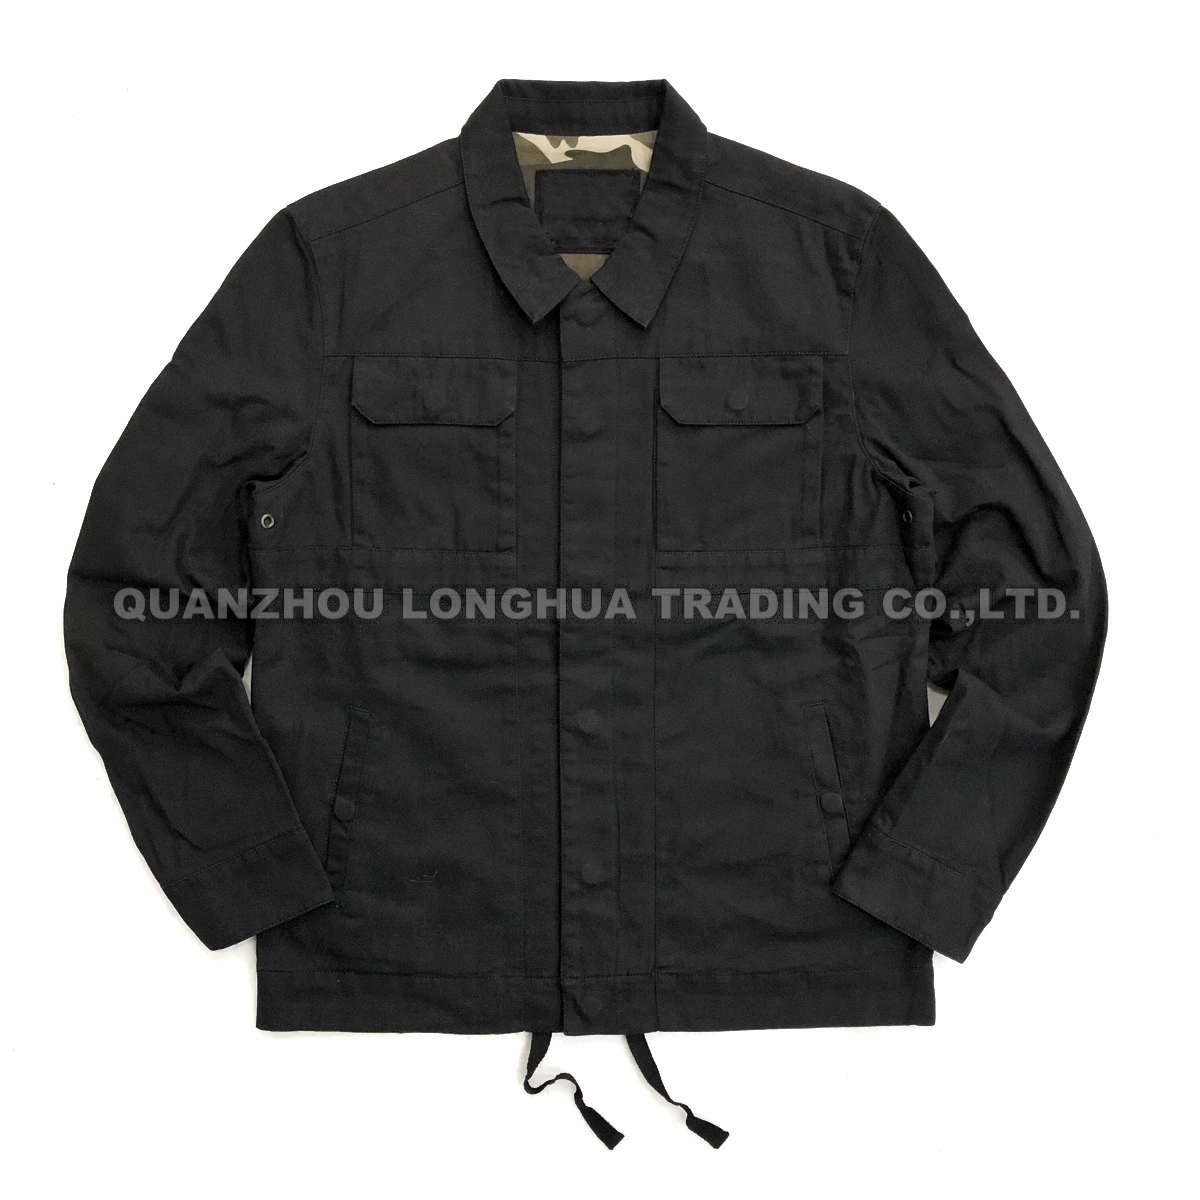 Men Jacket Boys Jacket Cotton Garment Enzyme Wash Clothes with Buttons Black Fashion Clothing Outdoor Apparel